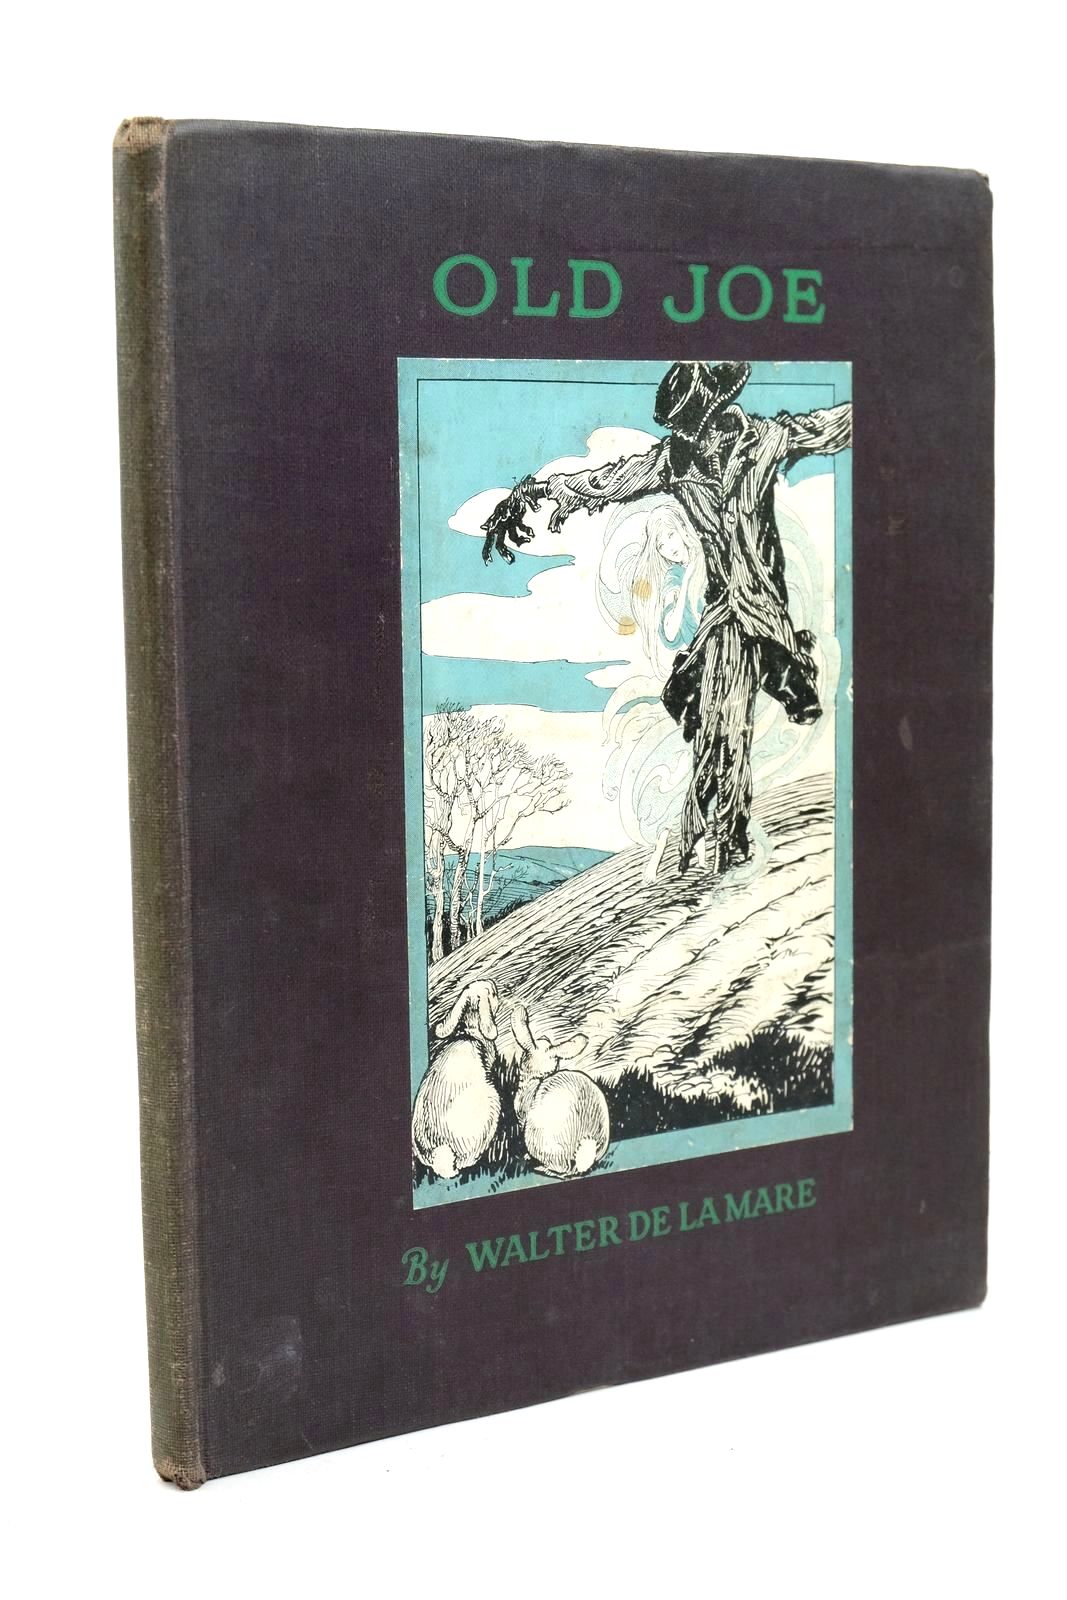 Photo of OLD JOE written by De La Mare, Walter illustrated by Nightingale, C.T. published by Basil Blackwell (STOCK CODE: 1322956)  for sale by Stella & Rose's Books